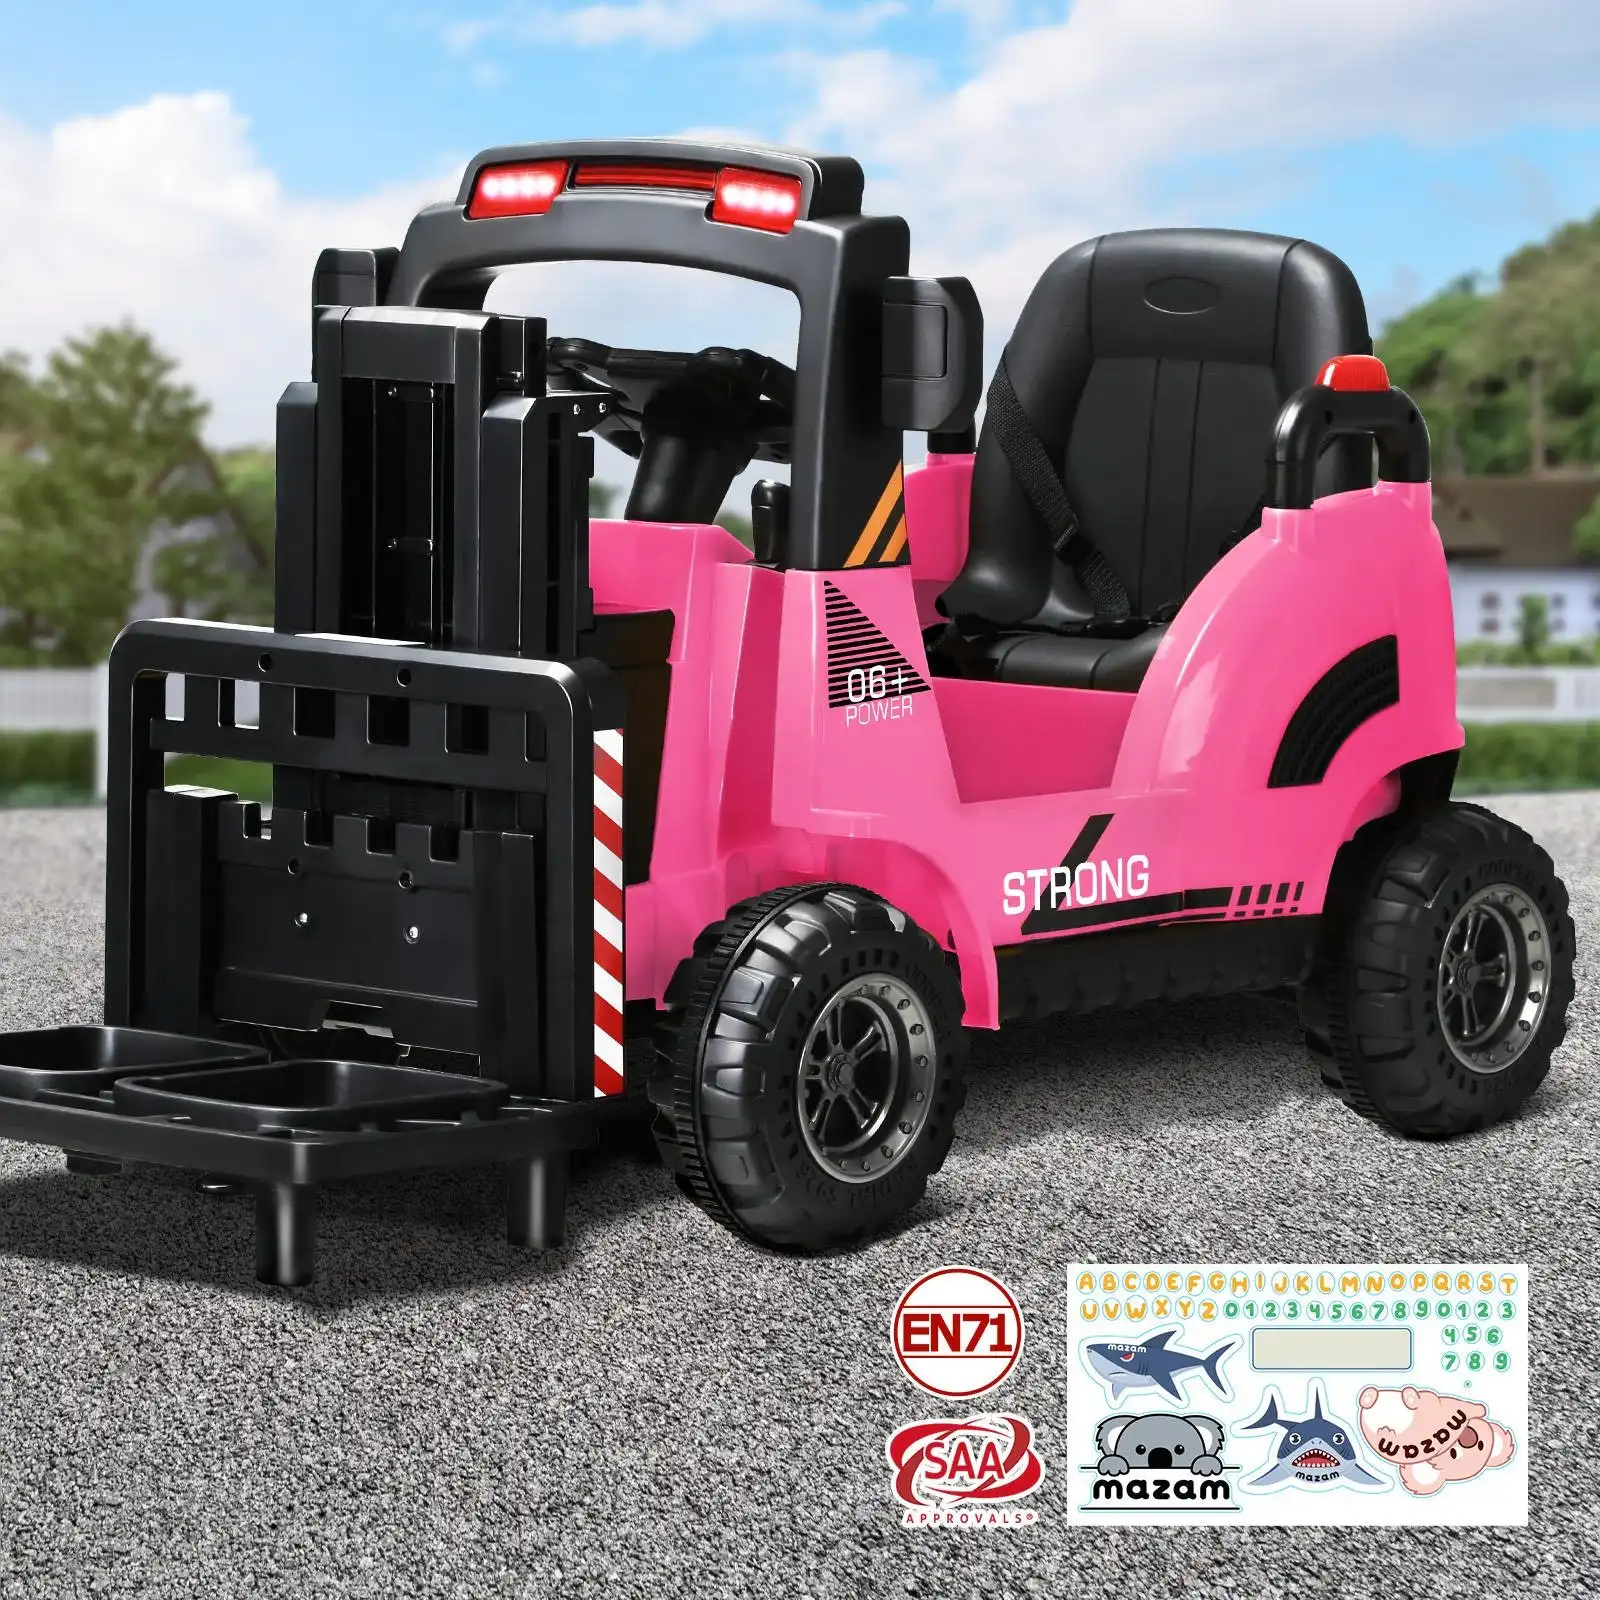 Mazam Ride-On Forklift Electric Car Toy for Toddlers Kids 12V Rechargeable Pink